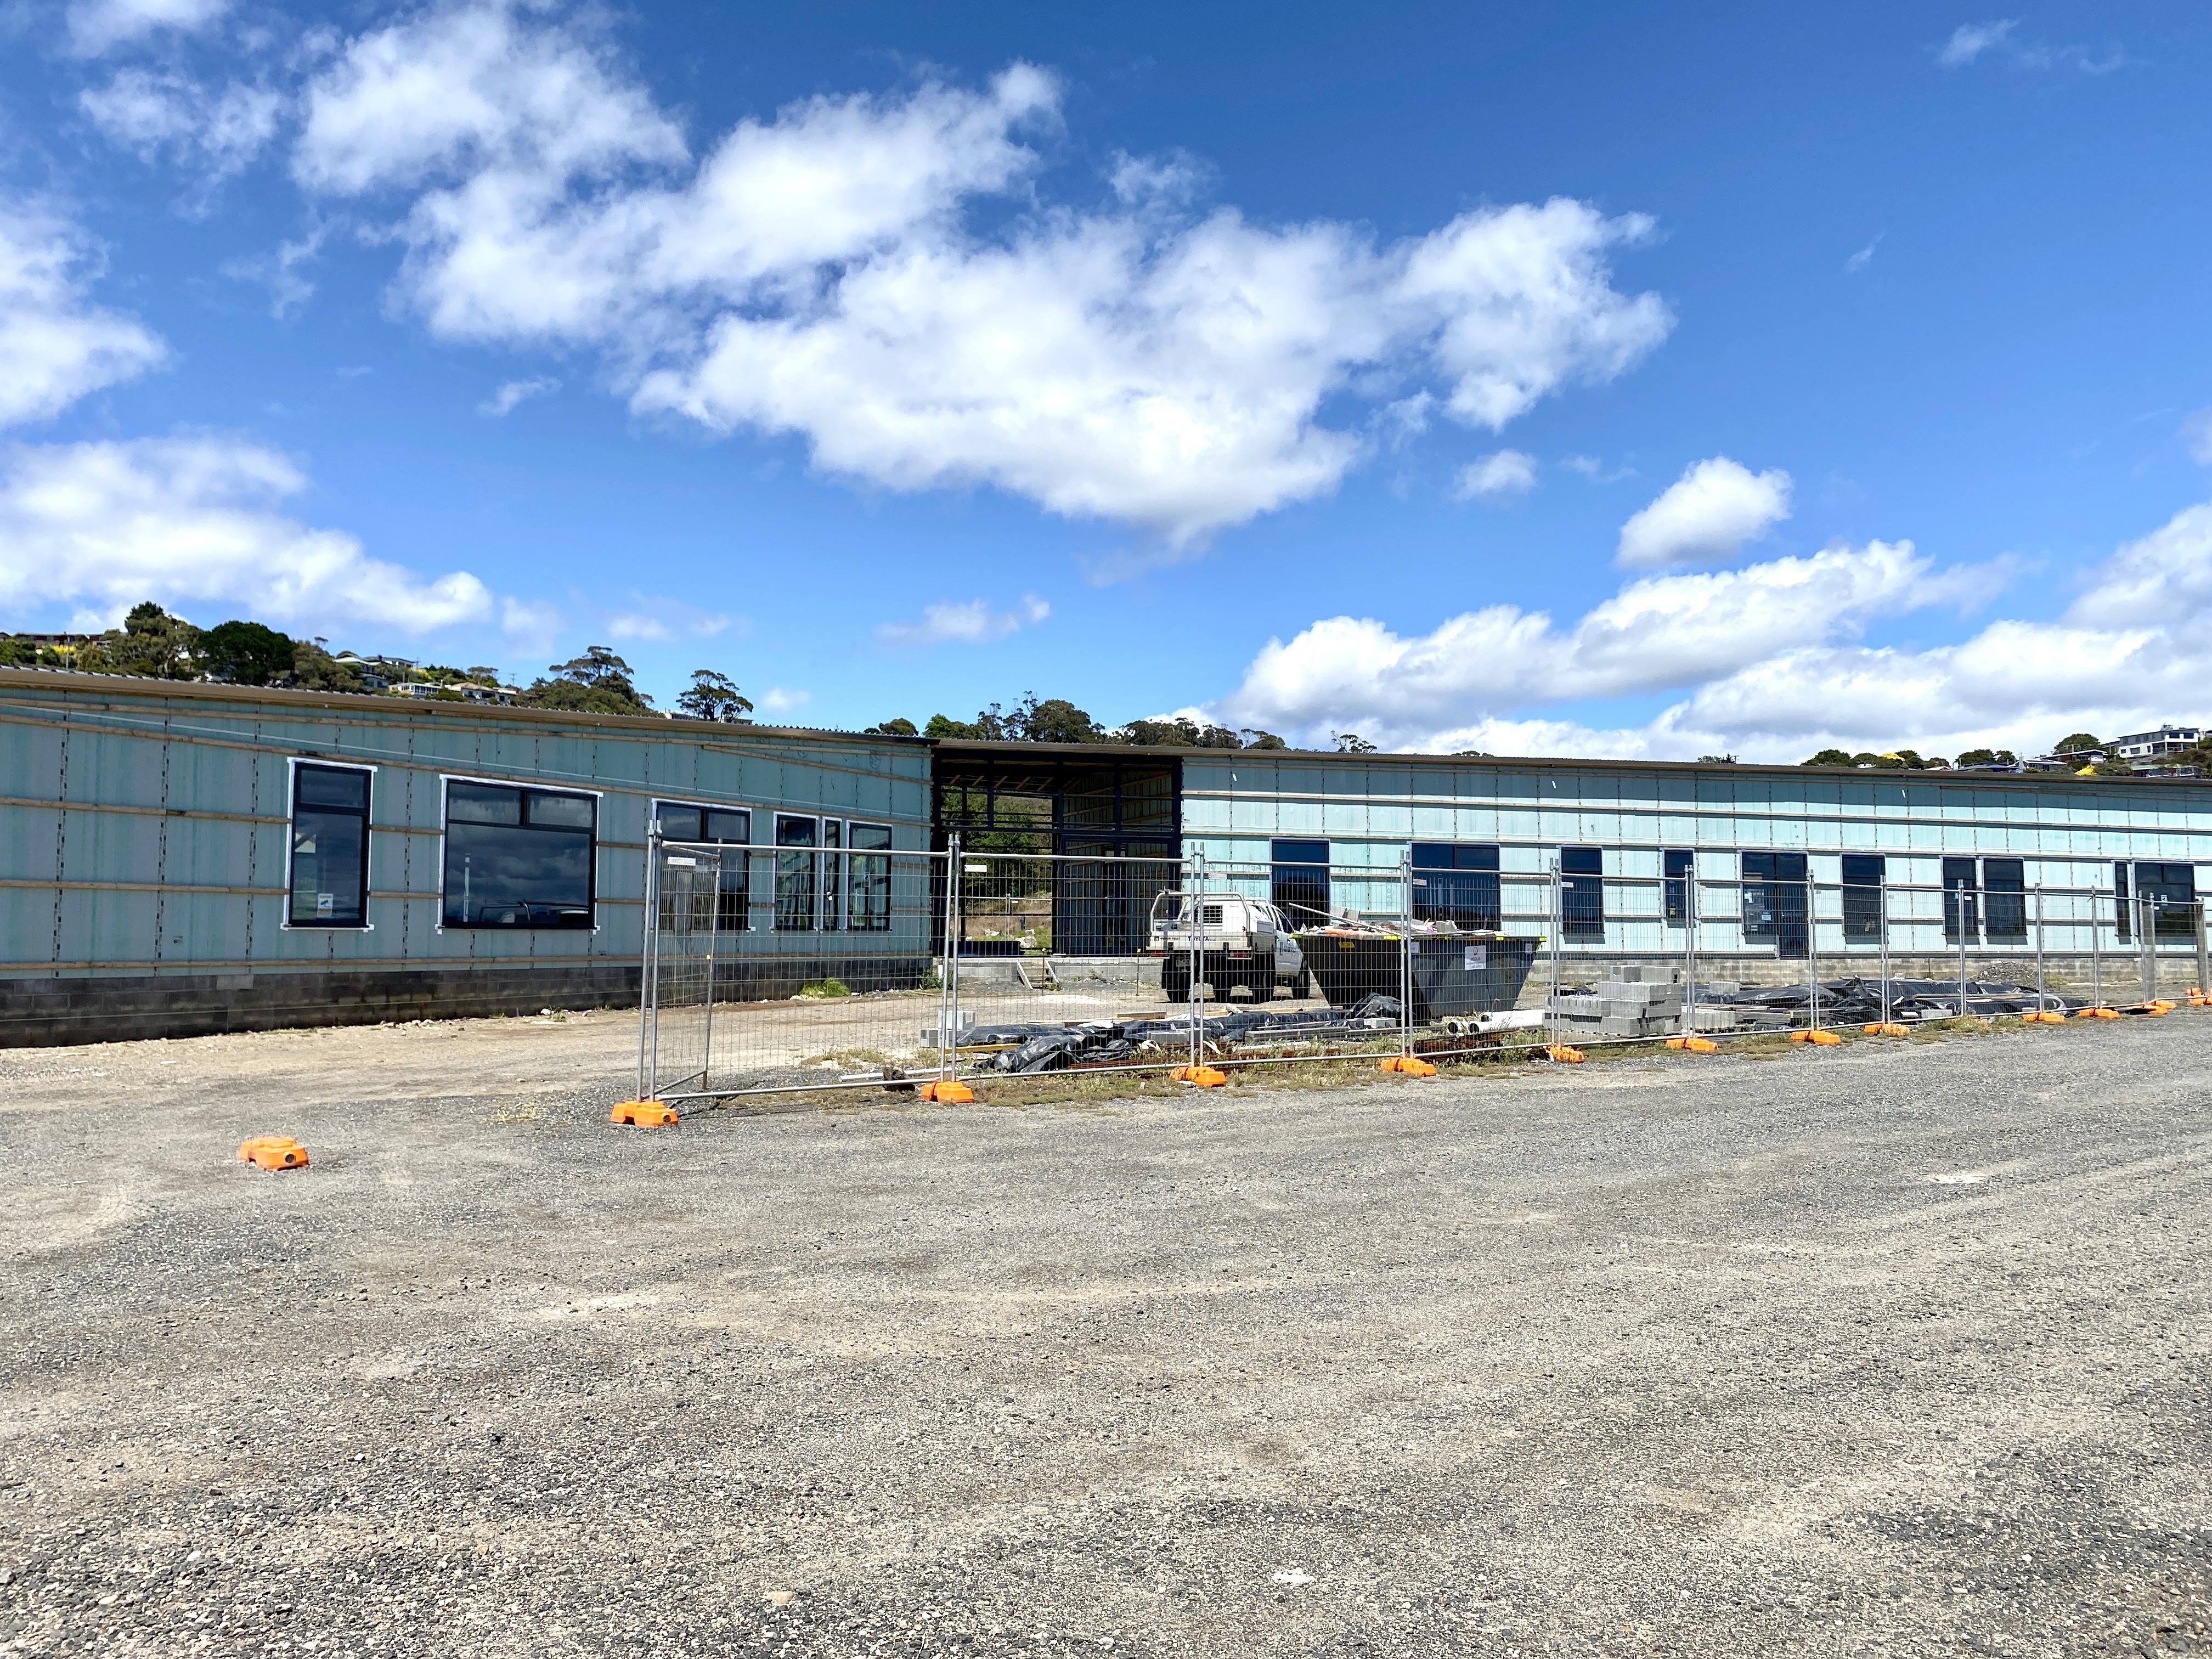 A photo of the new band and community facility at West Park